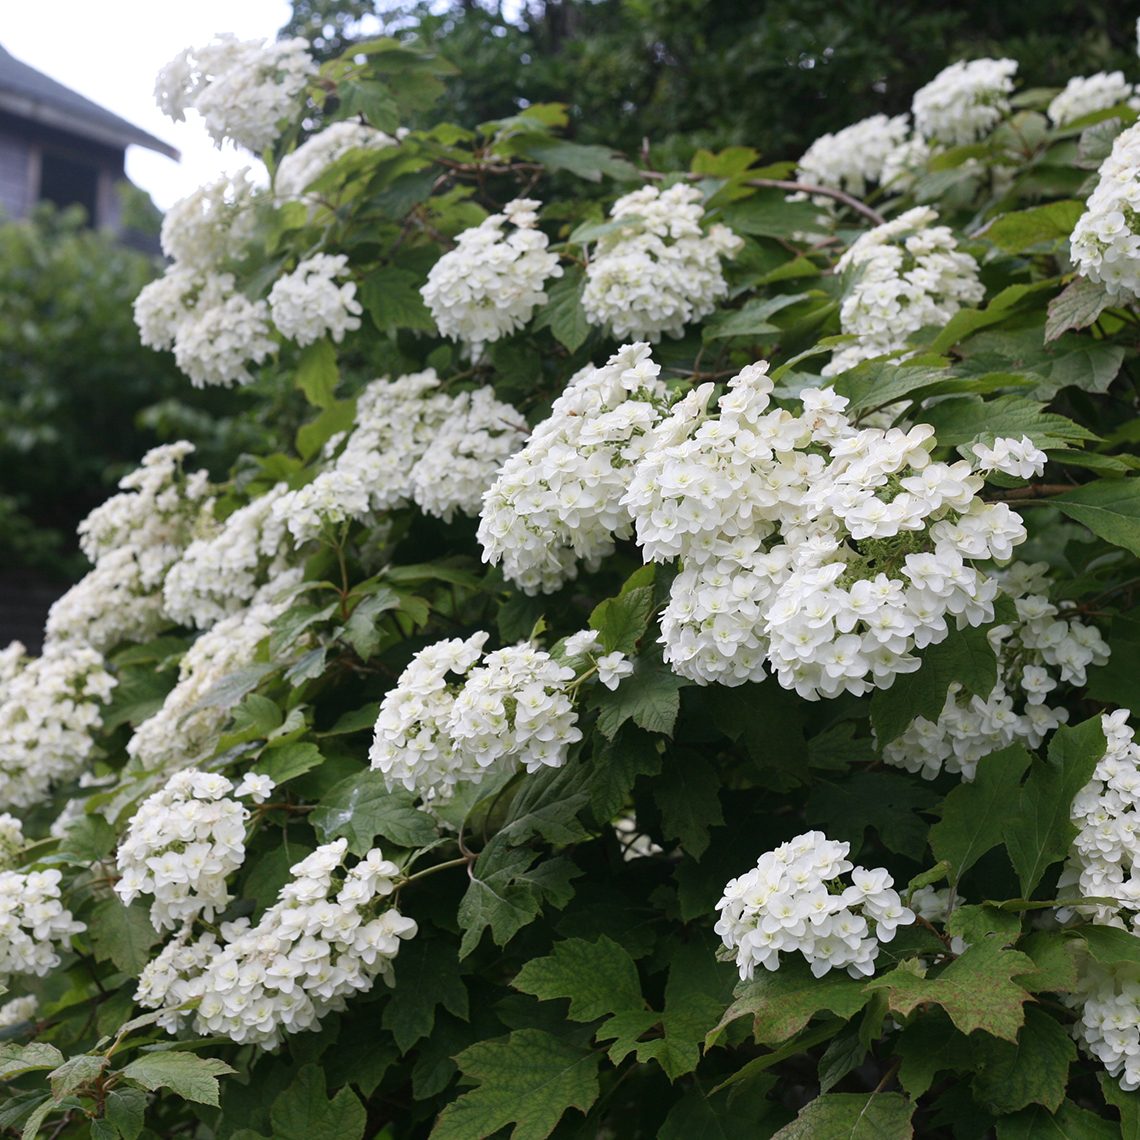 Many clusters of flowers on Snowflake oakleaf hydrangea showing the unique double florets